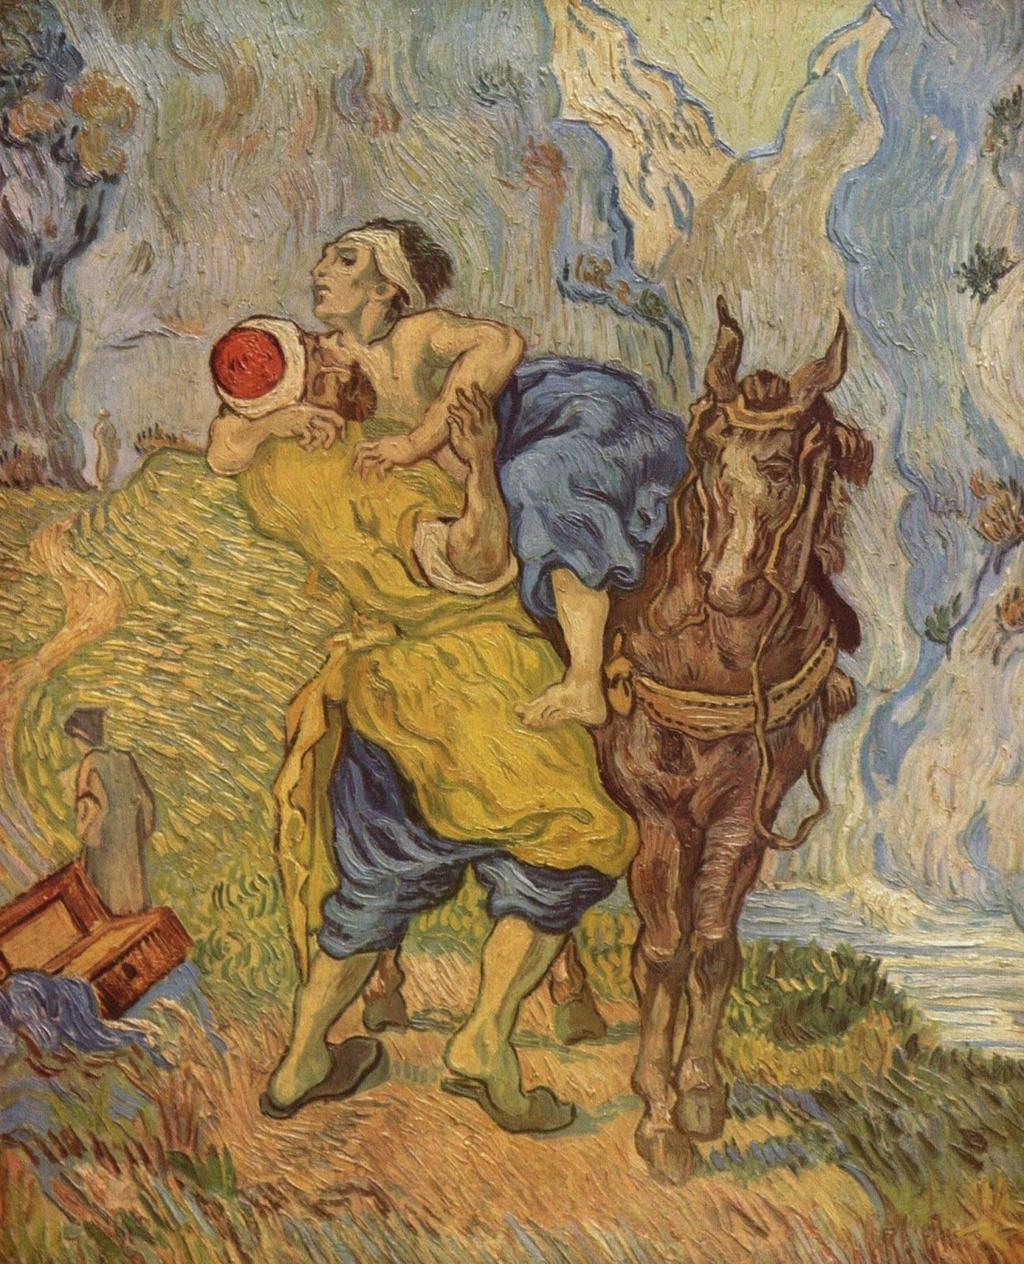 The good samaritan helps his enemy in a biblical parable that demonstrates Mill s golden rule: